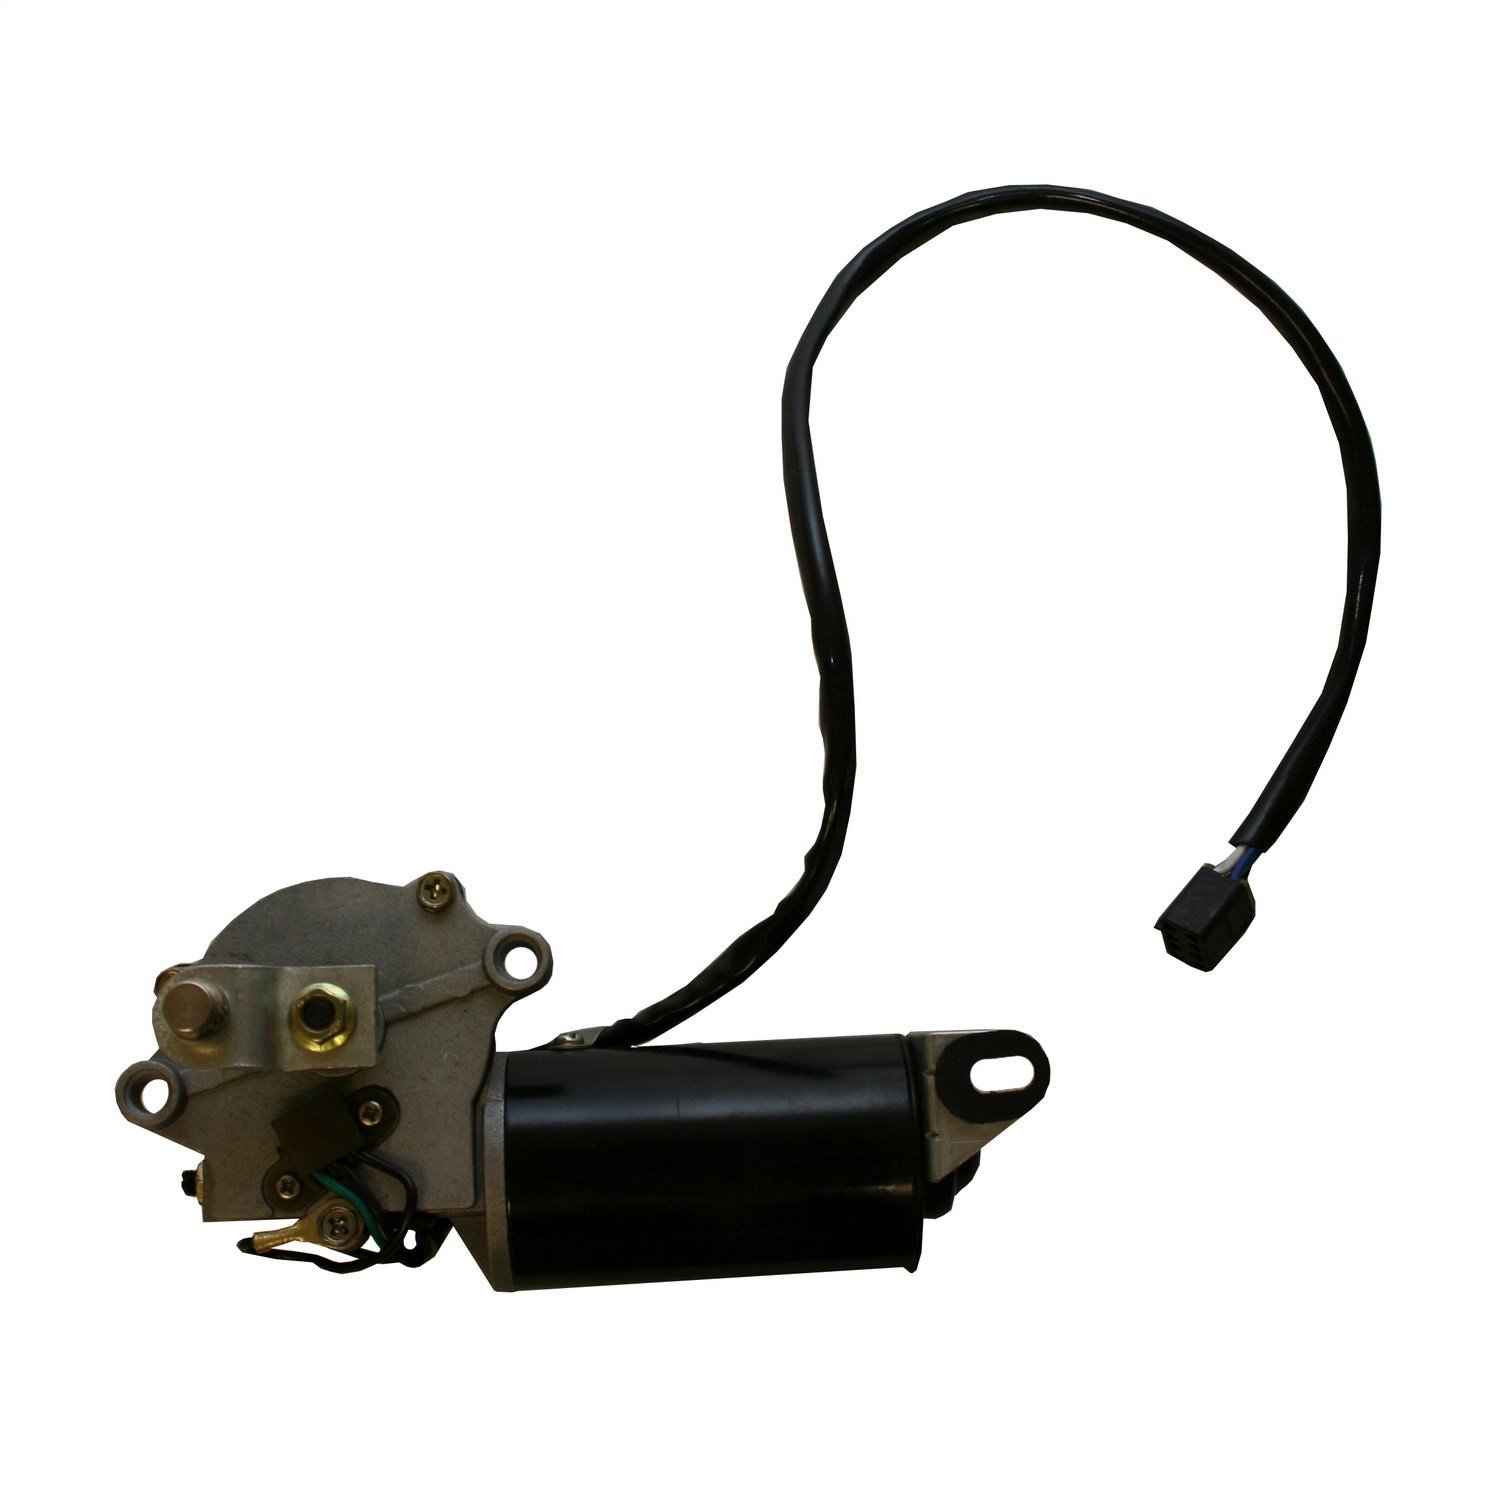 Replacement windshield wiper motor from Omix-ADA, Fits 87-95 Jeep Wrangler YJ